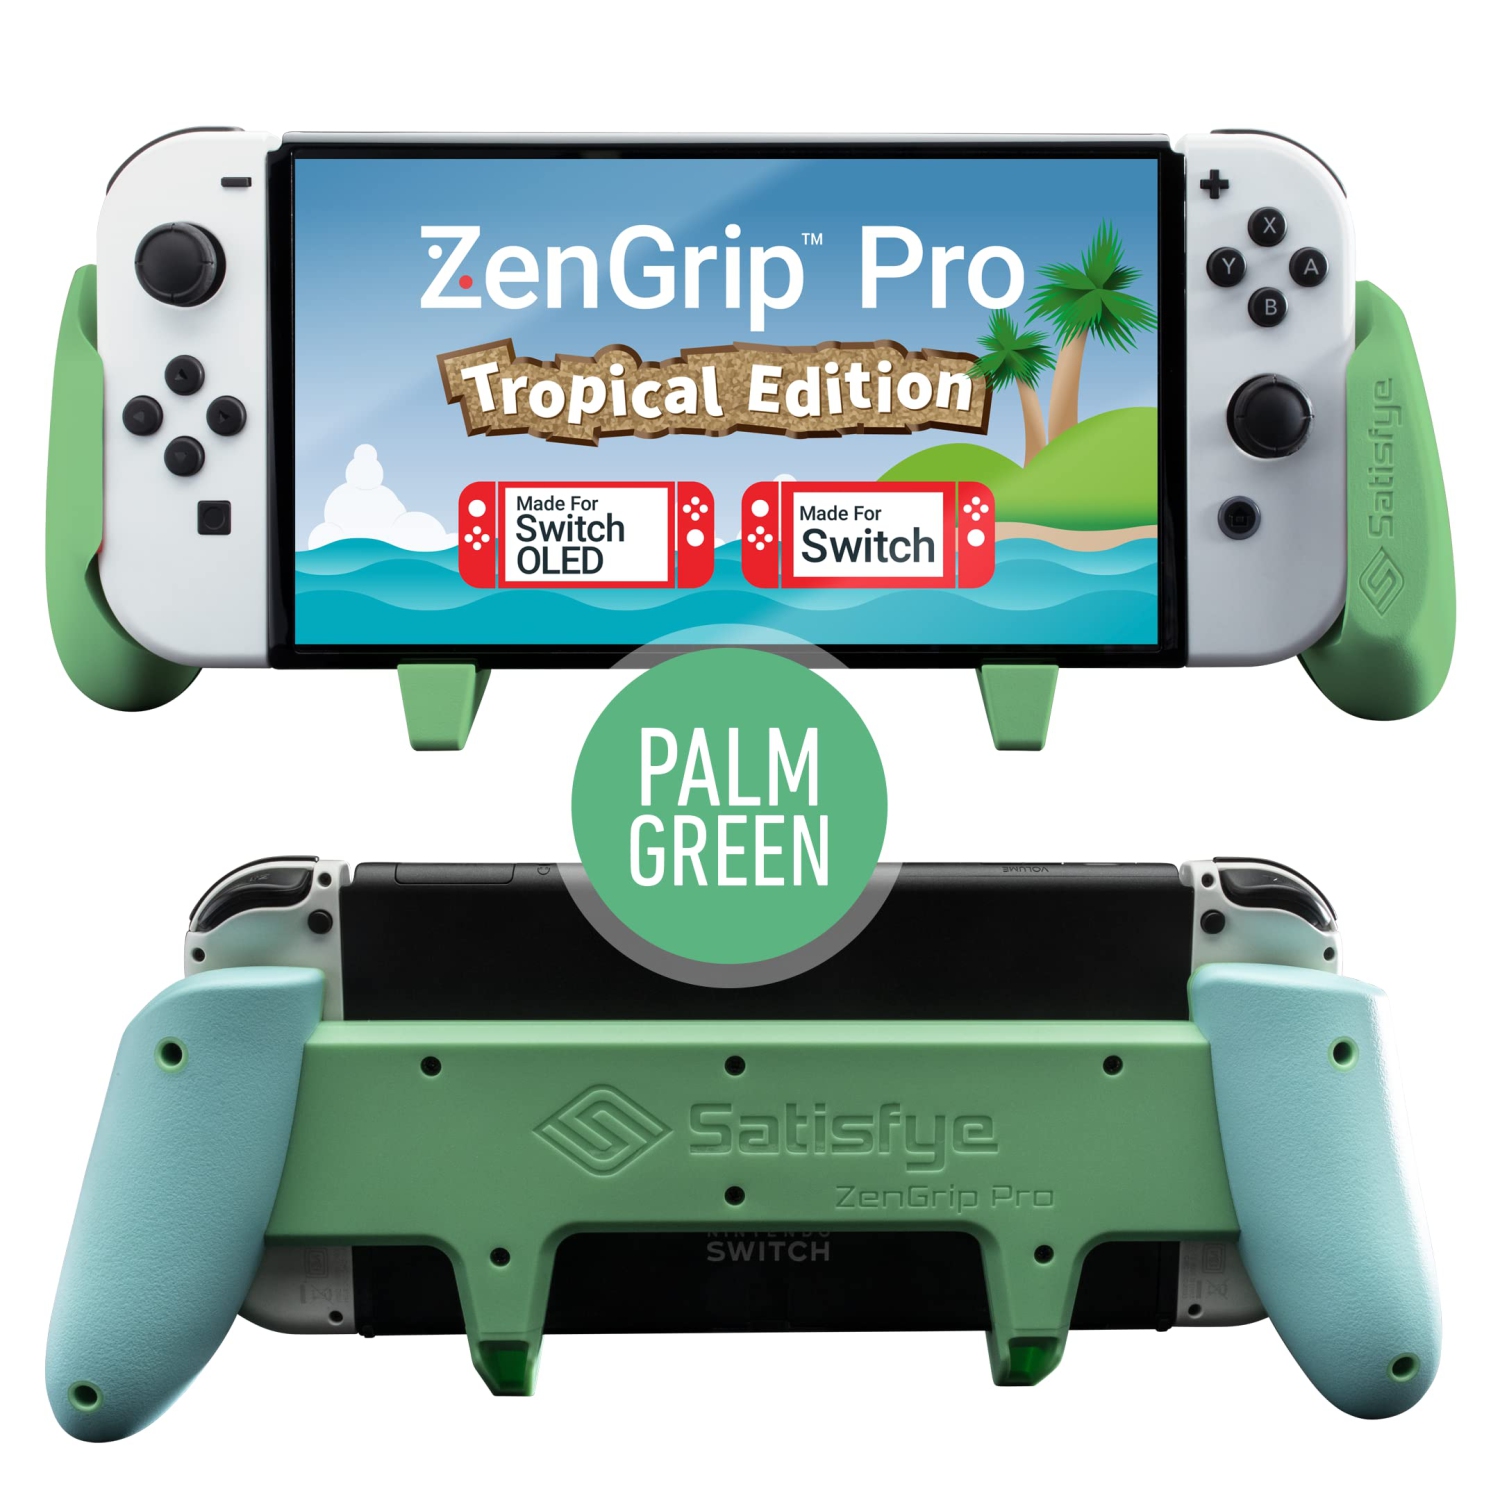 Experience gaming comfort with ZenGrip Pro Gen 3 OLED - a Nintendo Switch compatible grip. Offers ergonomic control & is a must-have green Switch accessory for gamers.